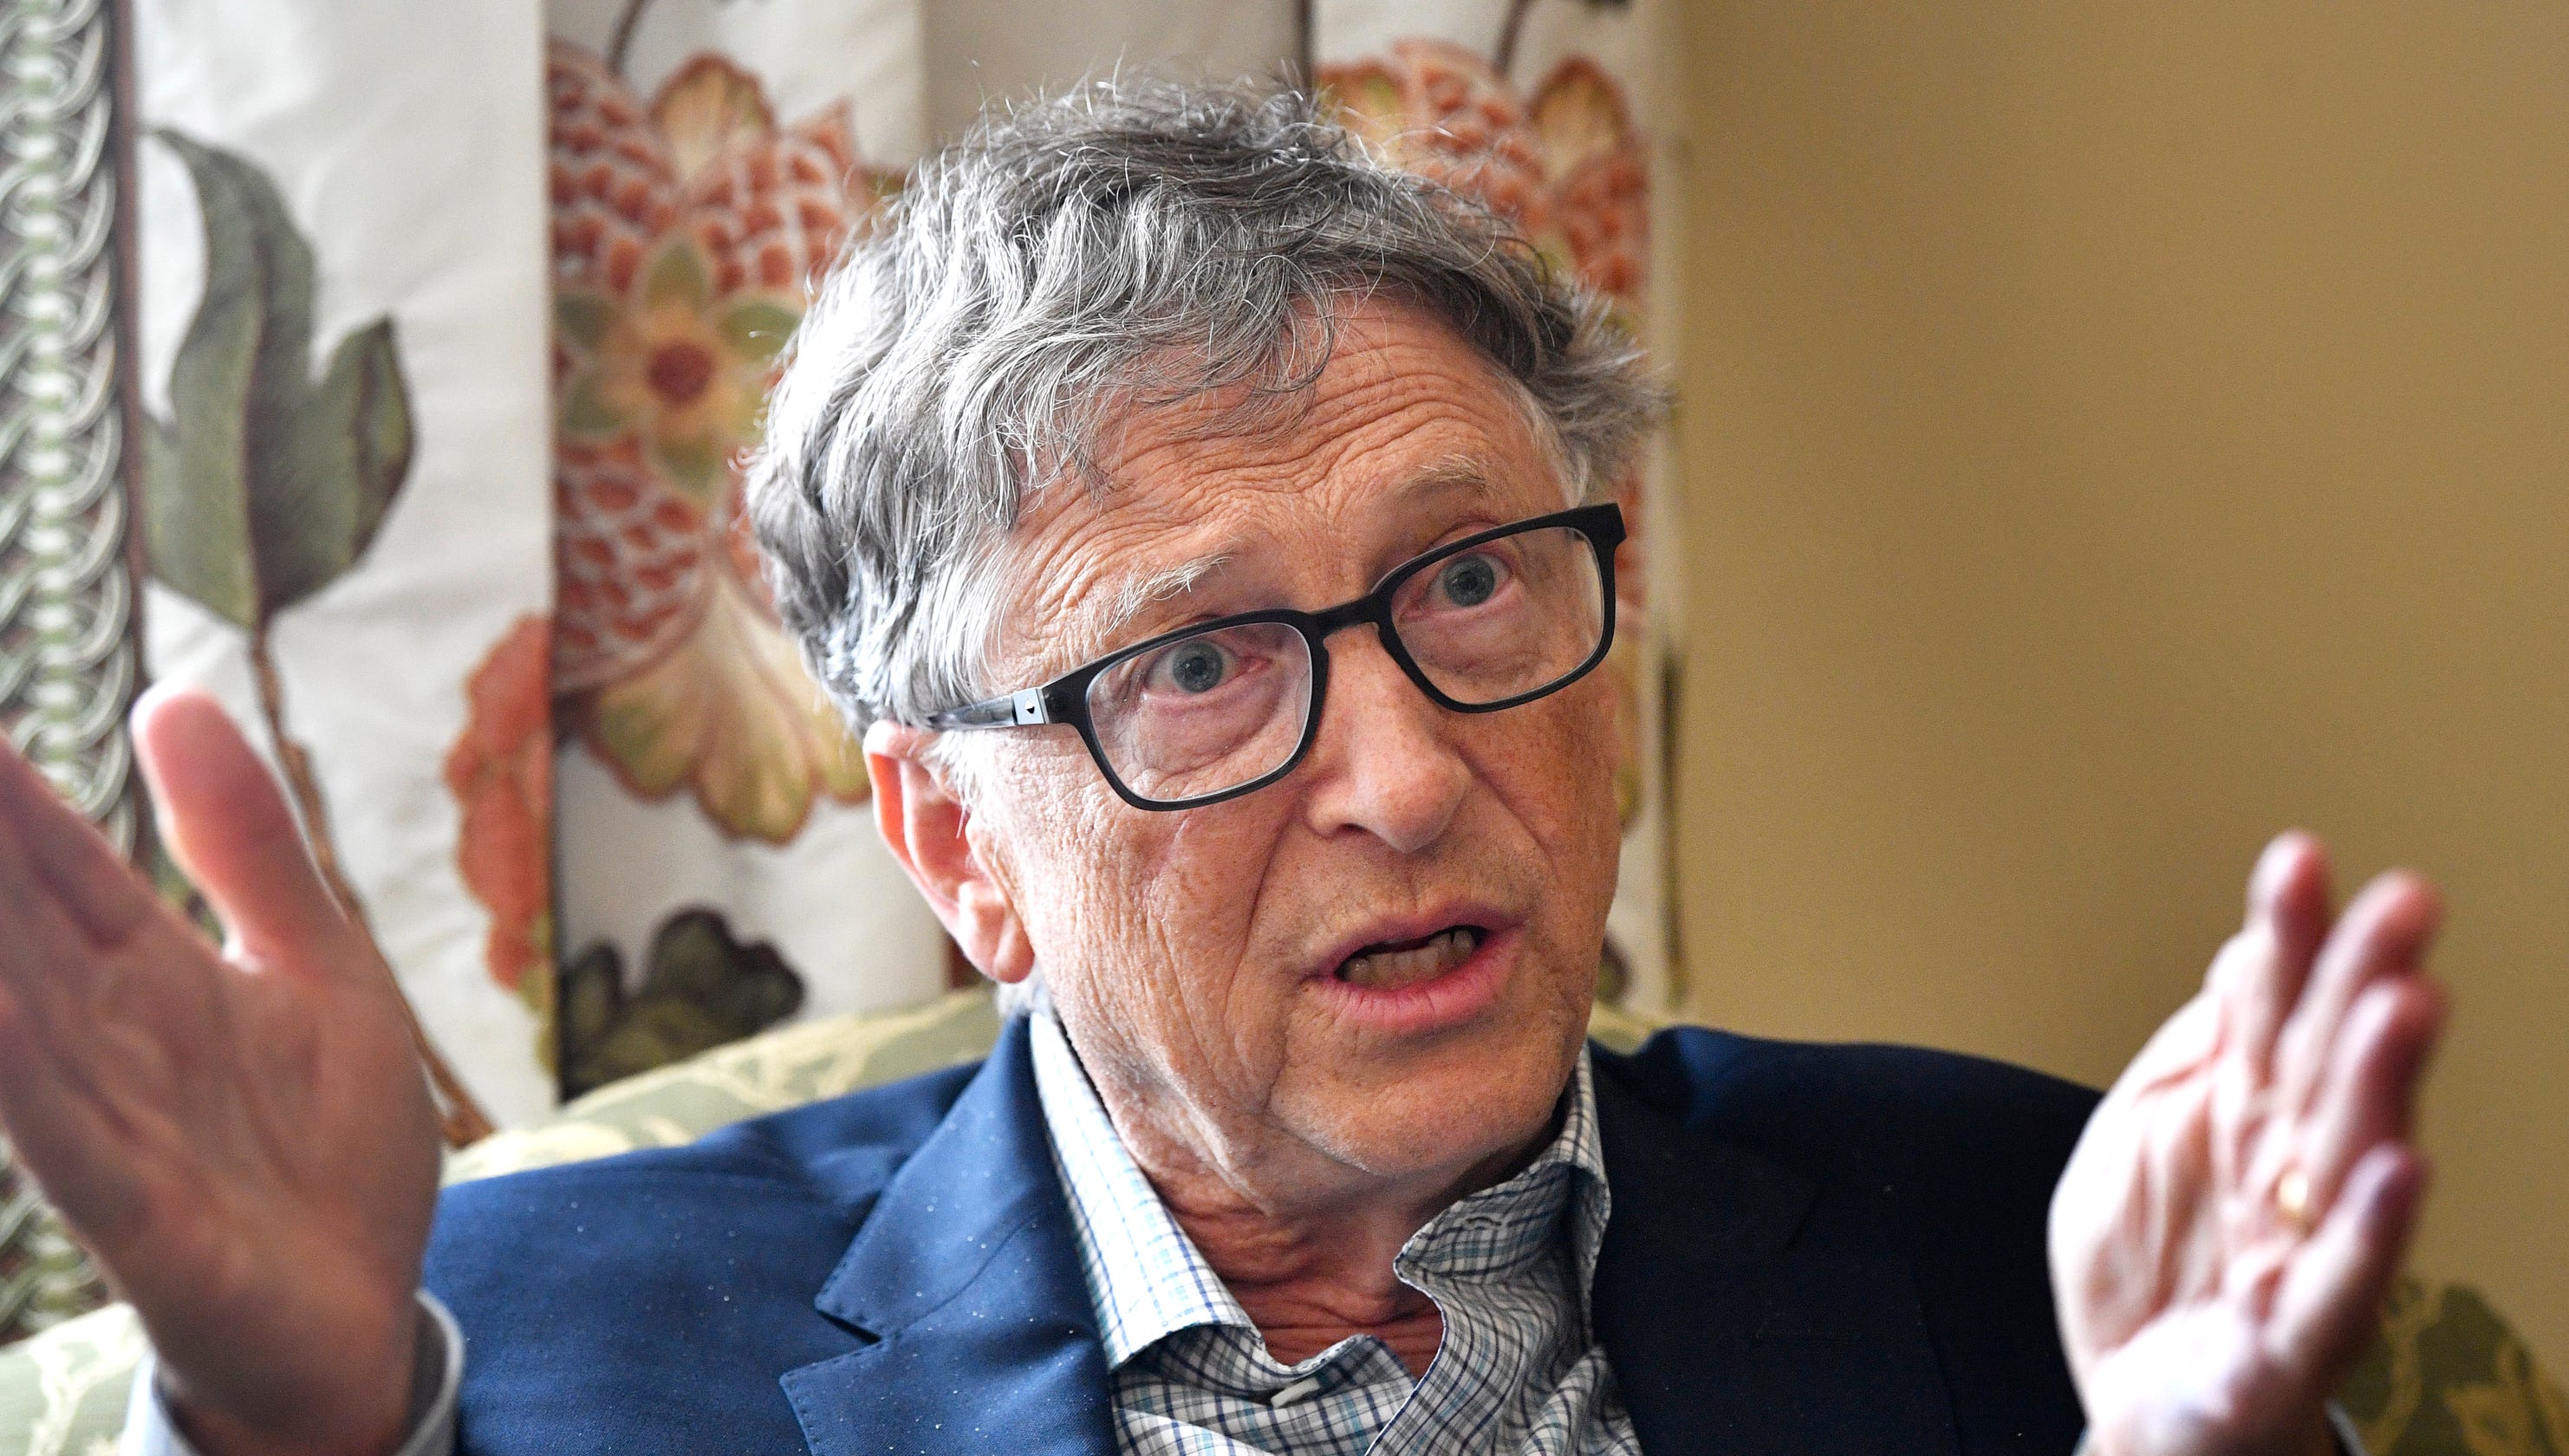 Bill Gates eyes the work ahead for Tennessee in education during visit to Nashville